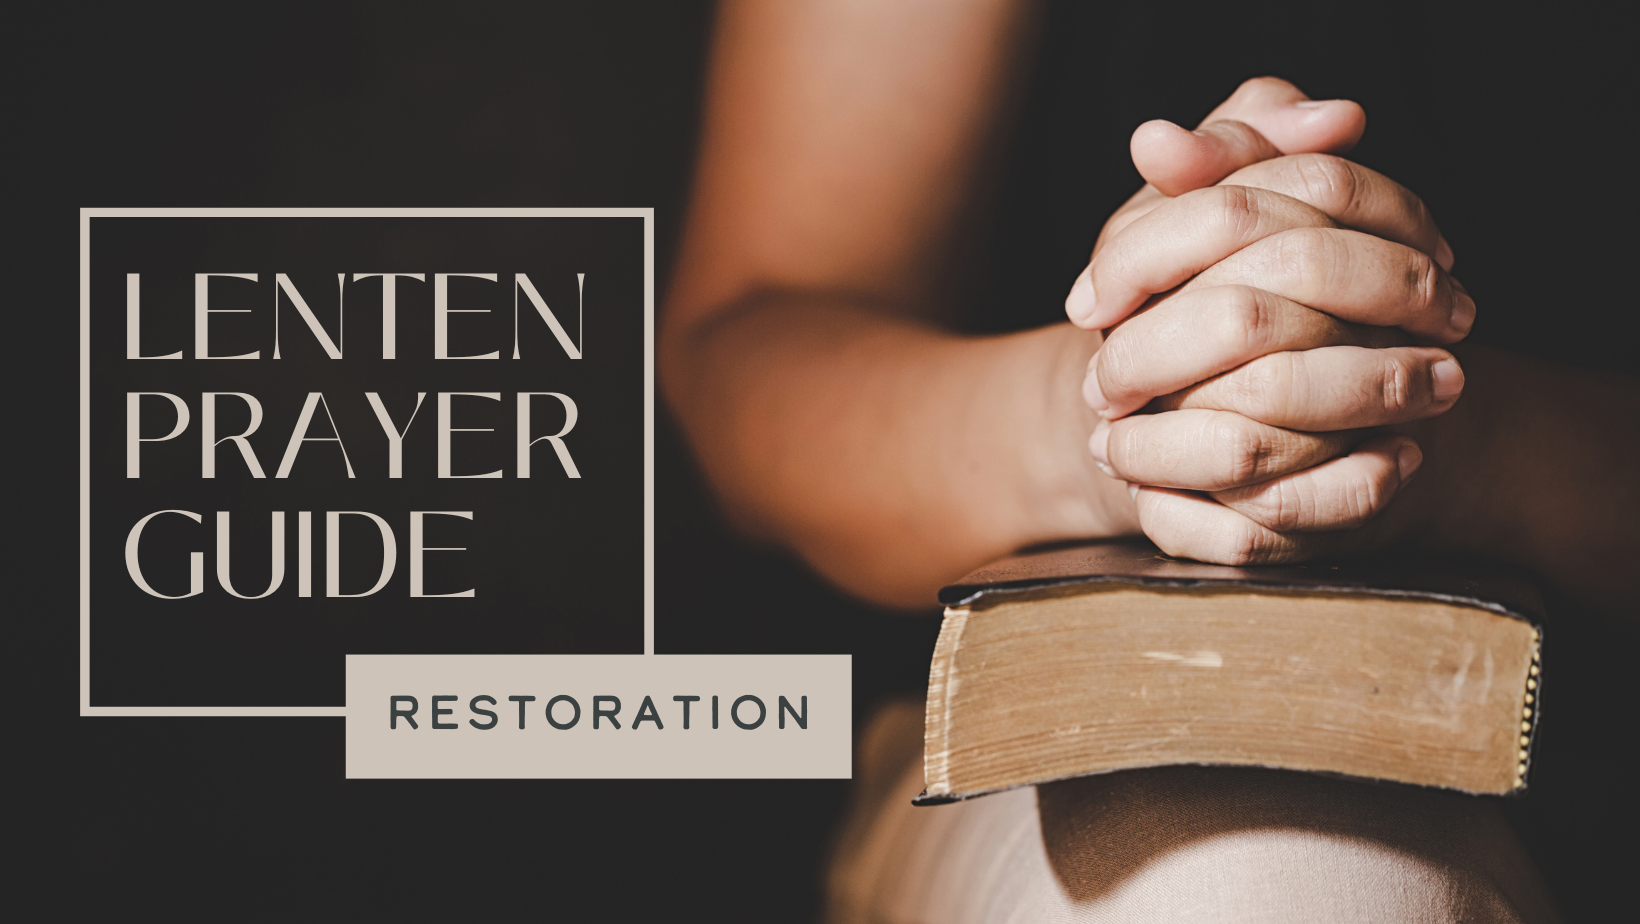 You are currently viewing Lenten Prayer Guide: Restoration